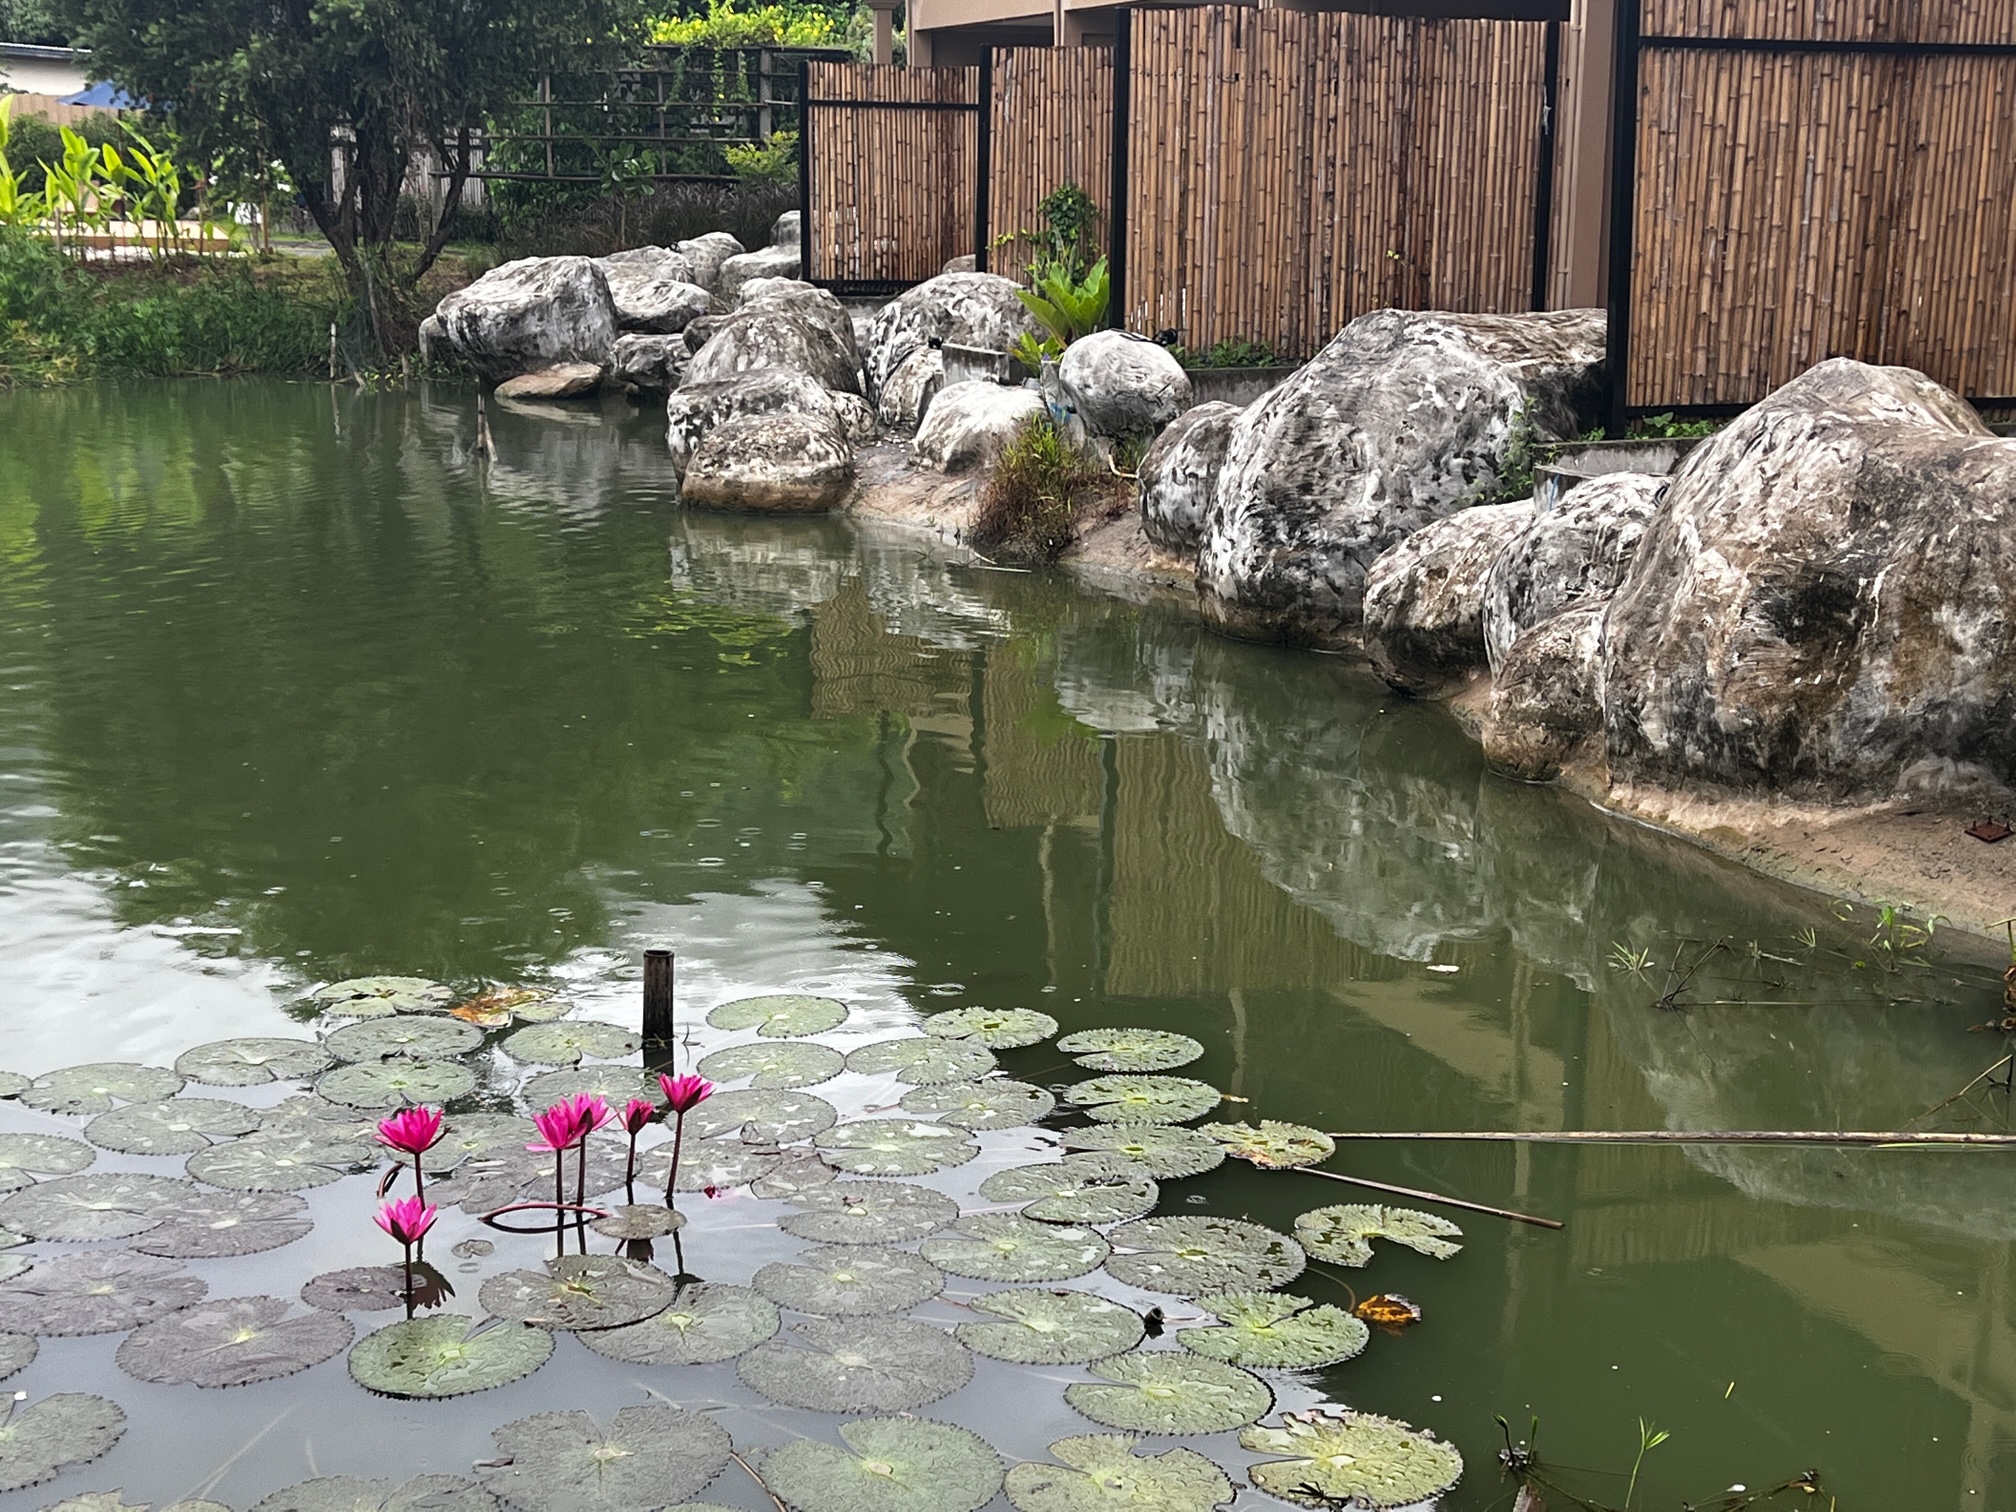 A beautiful little lily pond